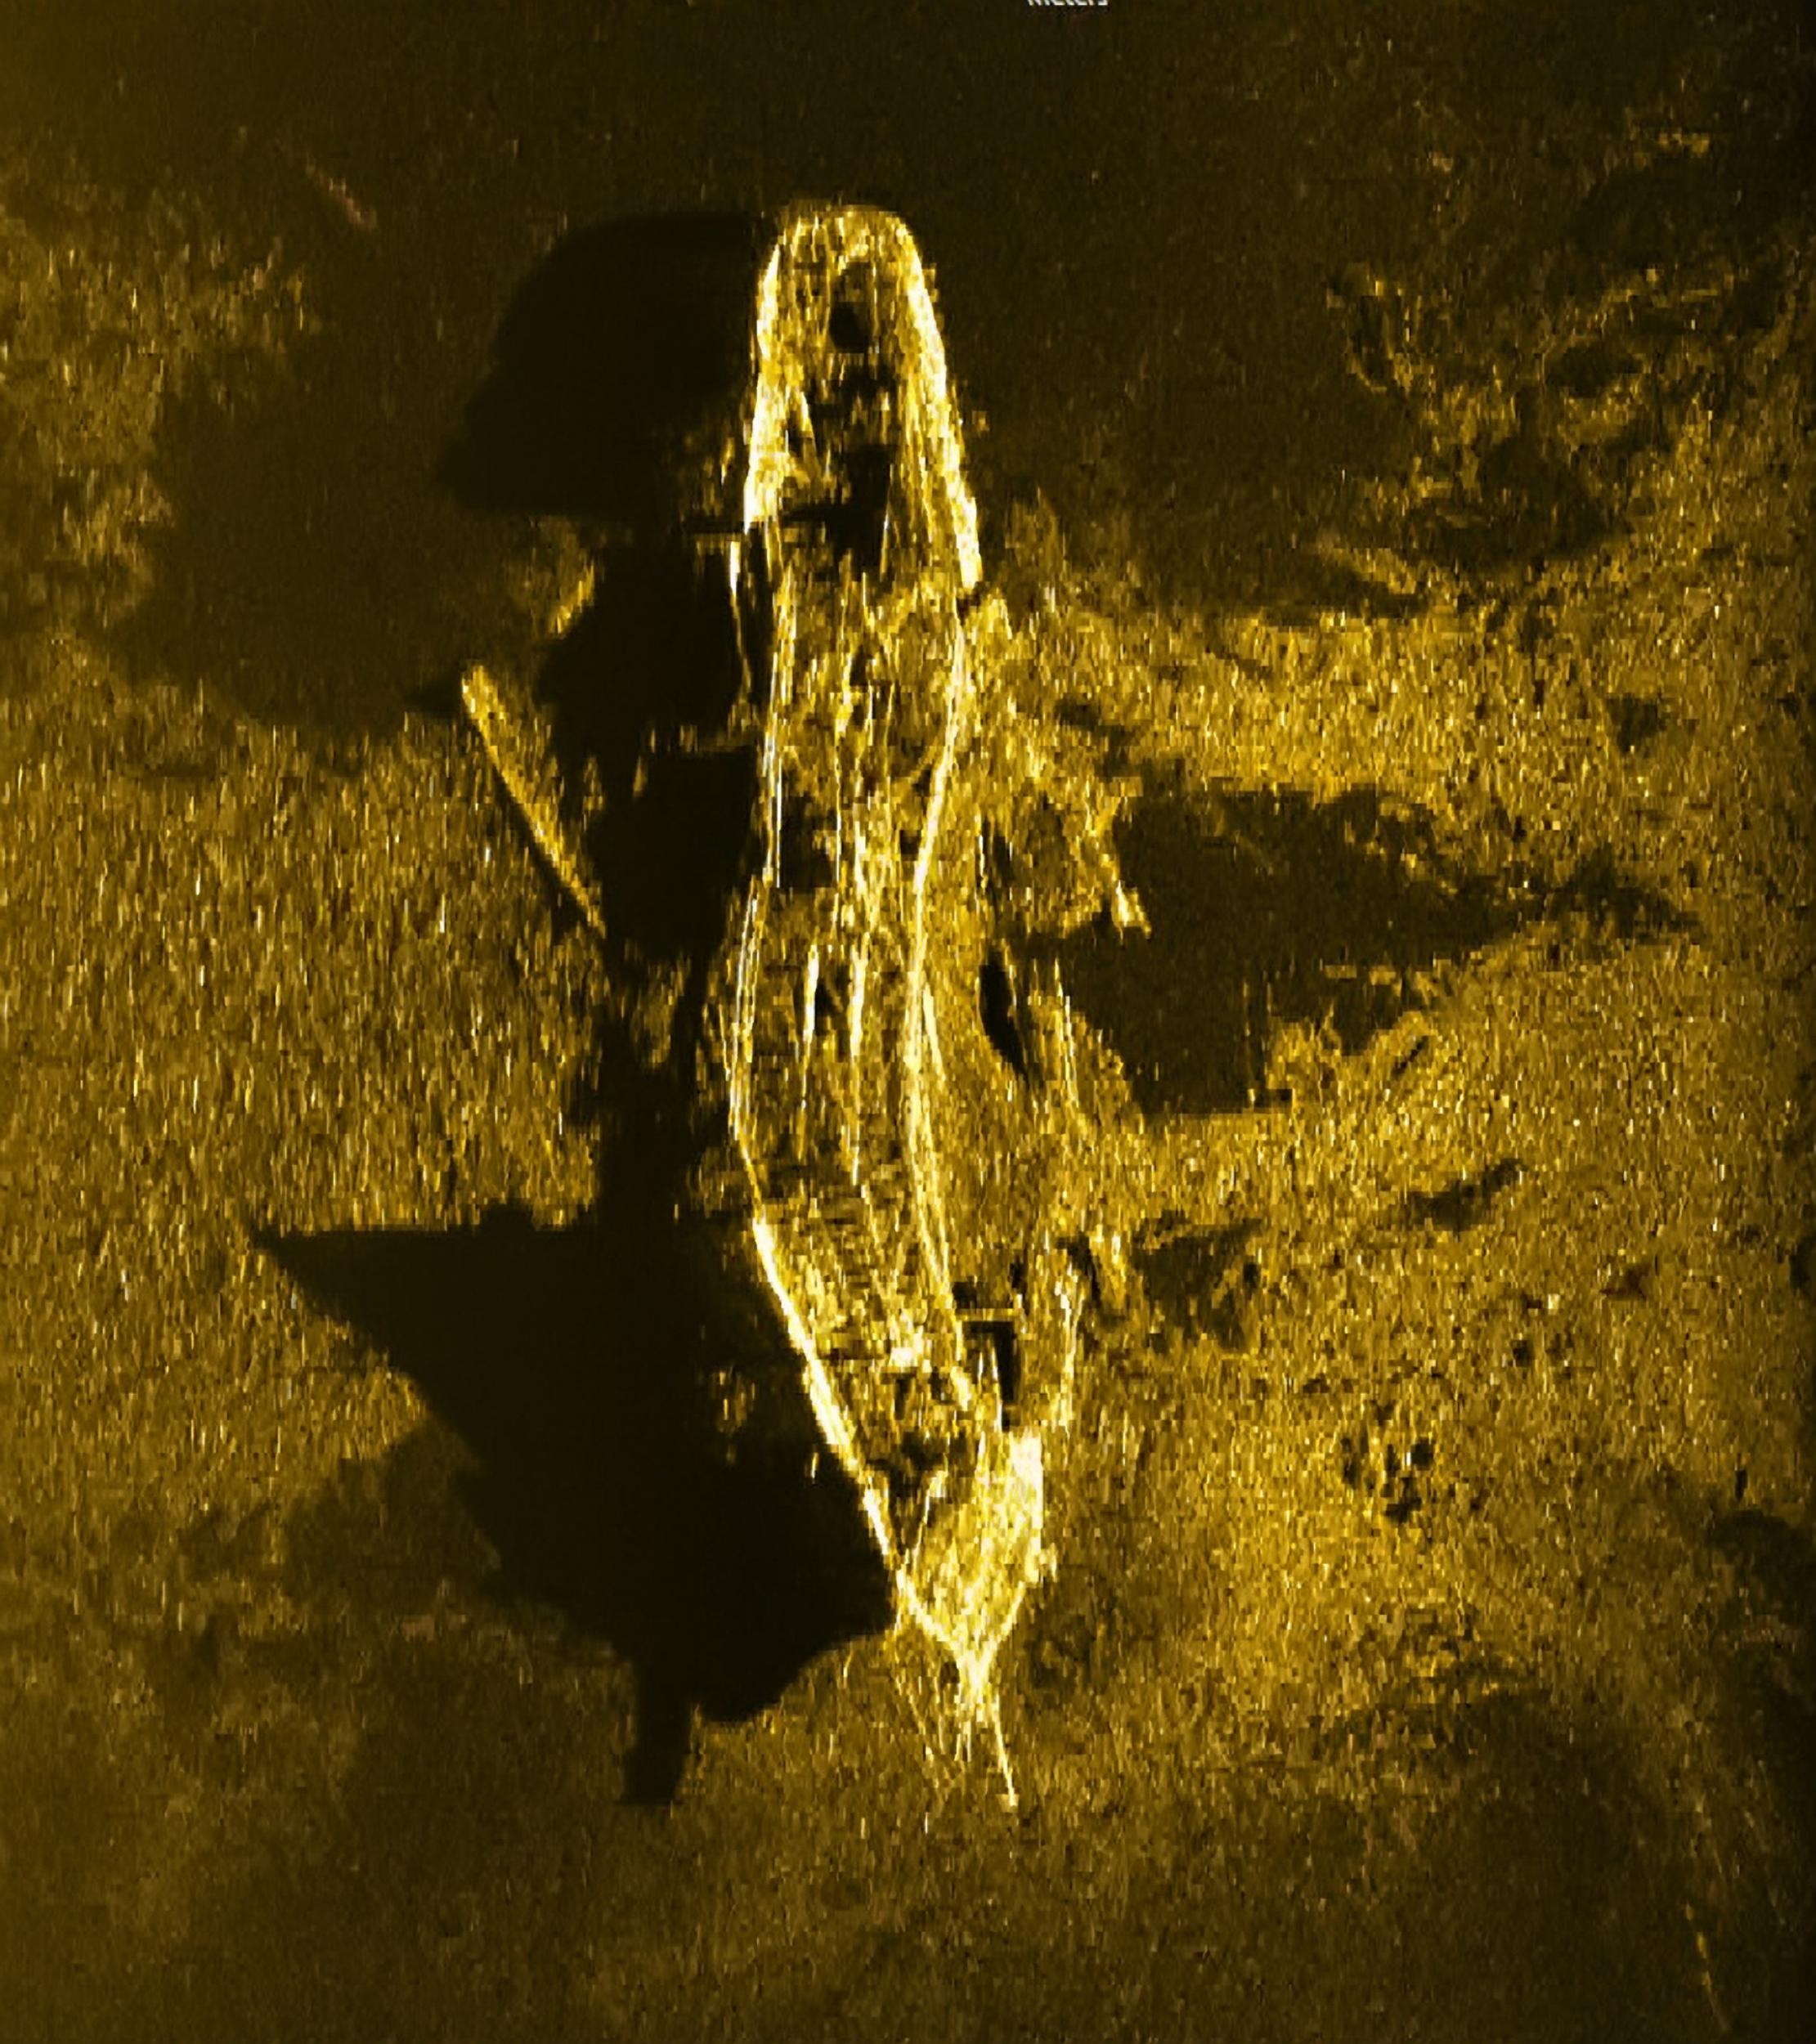 MH370 search team unearth 19th century shipwreck in hunt for missing Malaysia Airlines plane in Indian Ocean The Independent The Independent